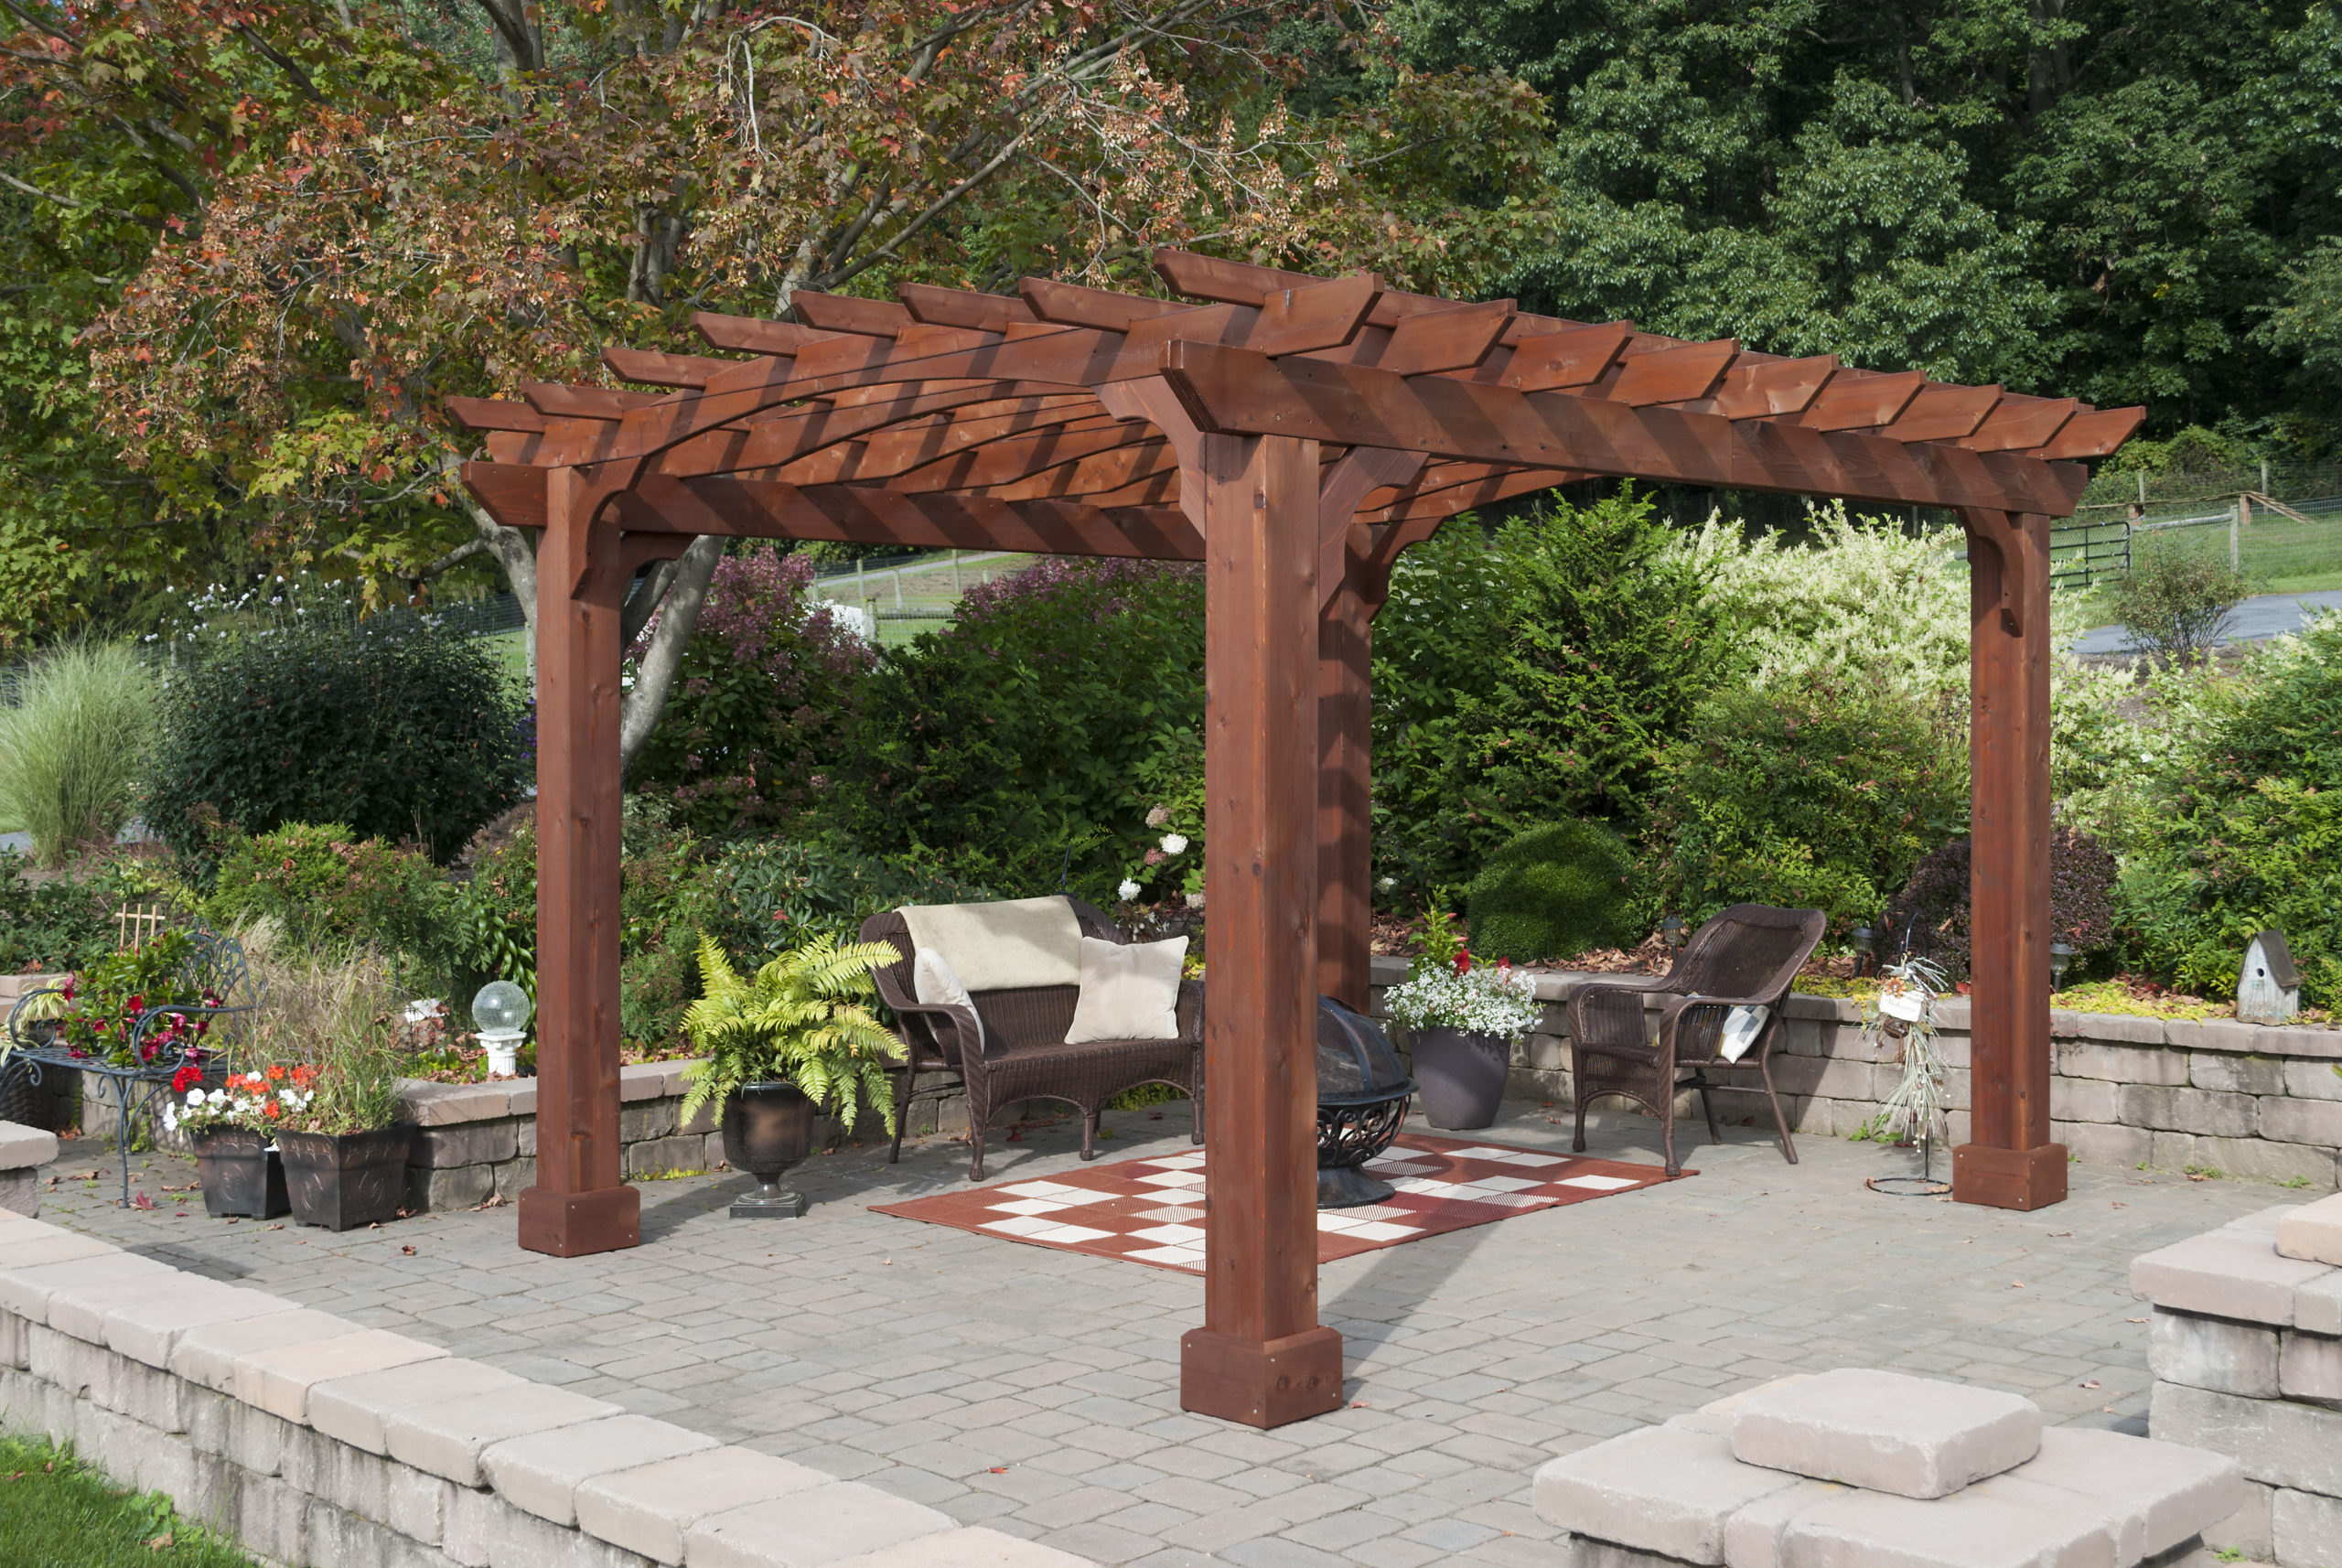 A moderate sized wooden pergola on a stone patio beside a garden.